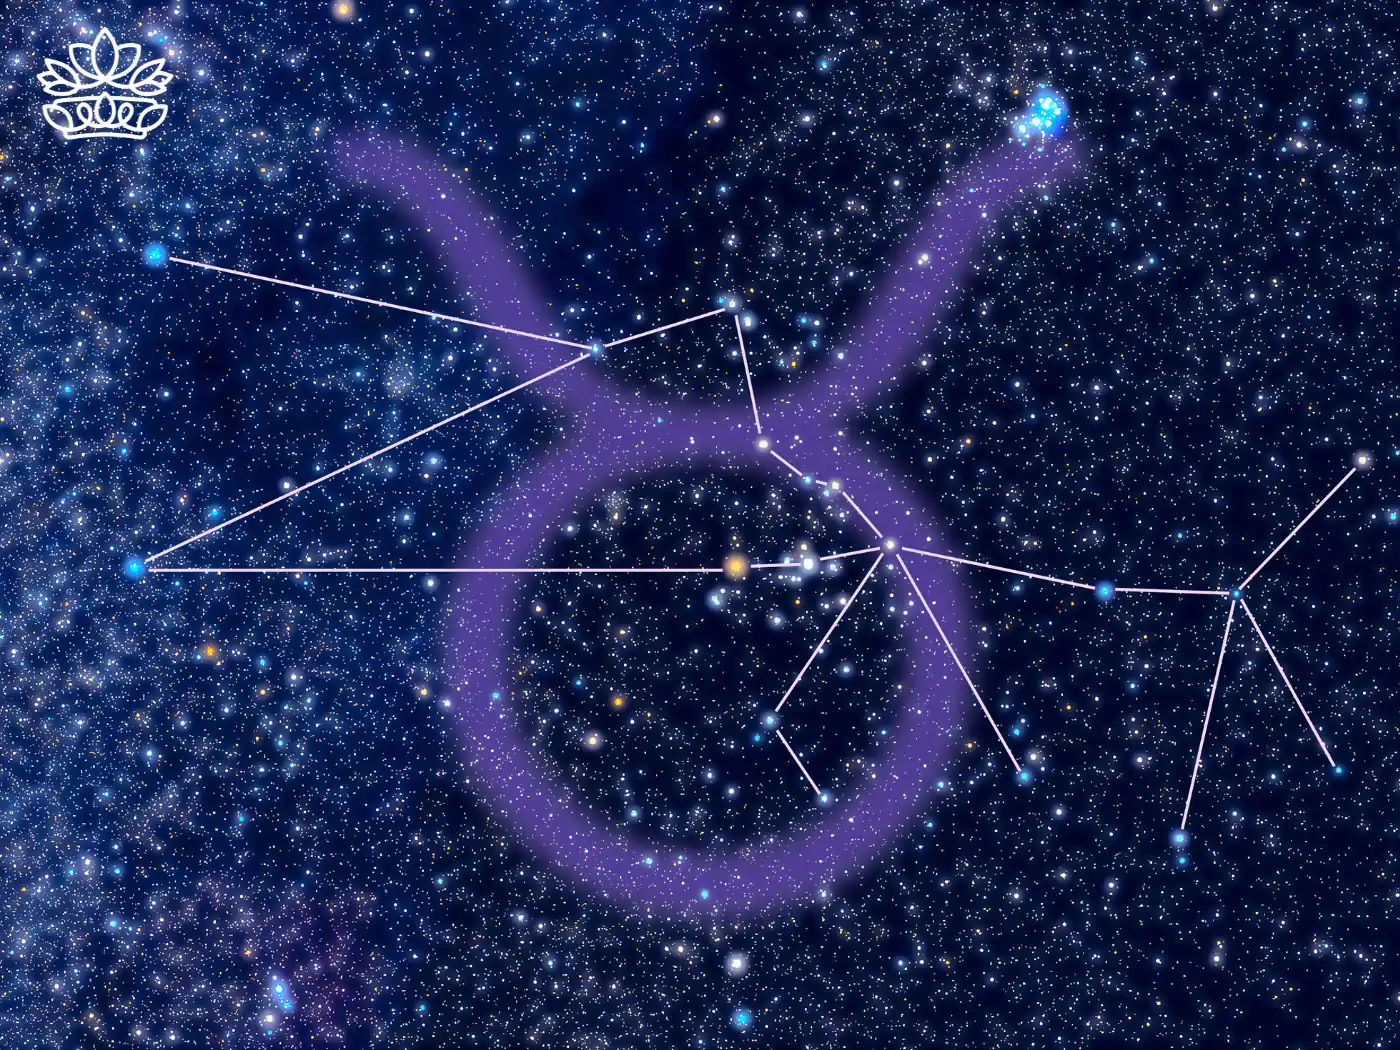 The Taurus constellation highlighted in a star-filled sky with the Taurus symbol. Fabulous Flowers and Gifts. Taurus Flowers & Gifts Collection.